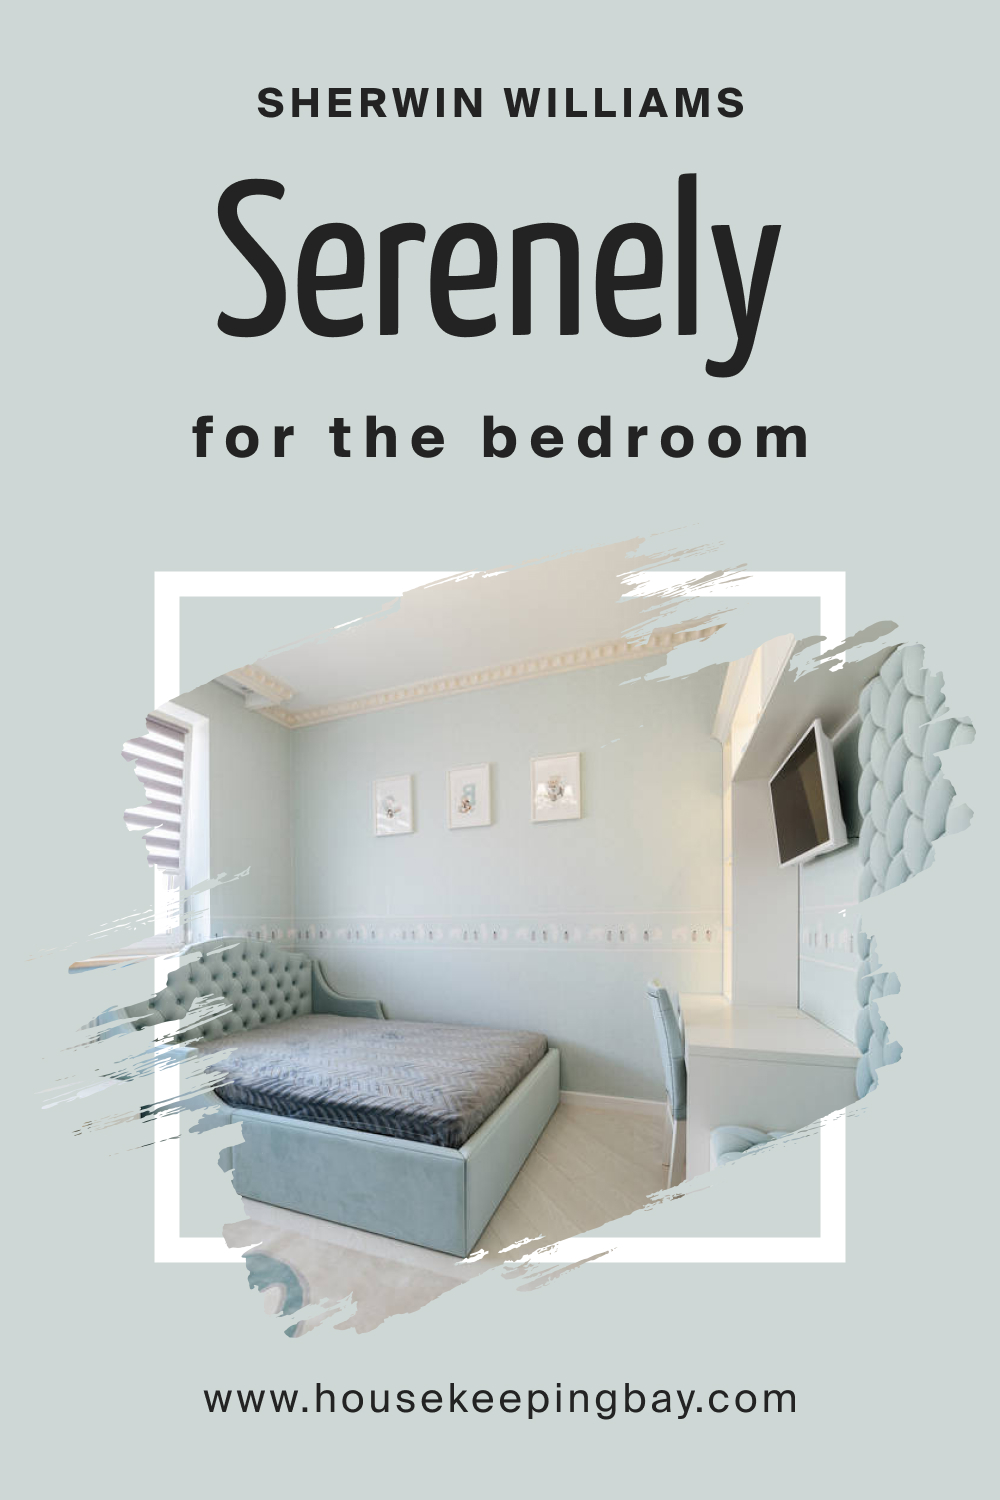 Sherwin Williams. SW 9632 Serenely For the bedroom